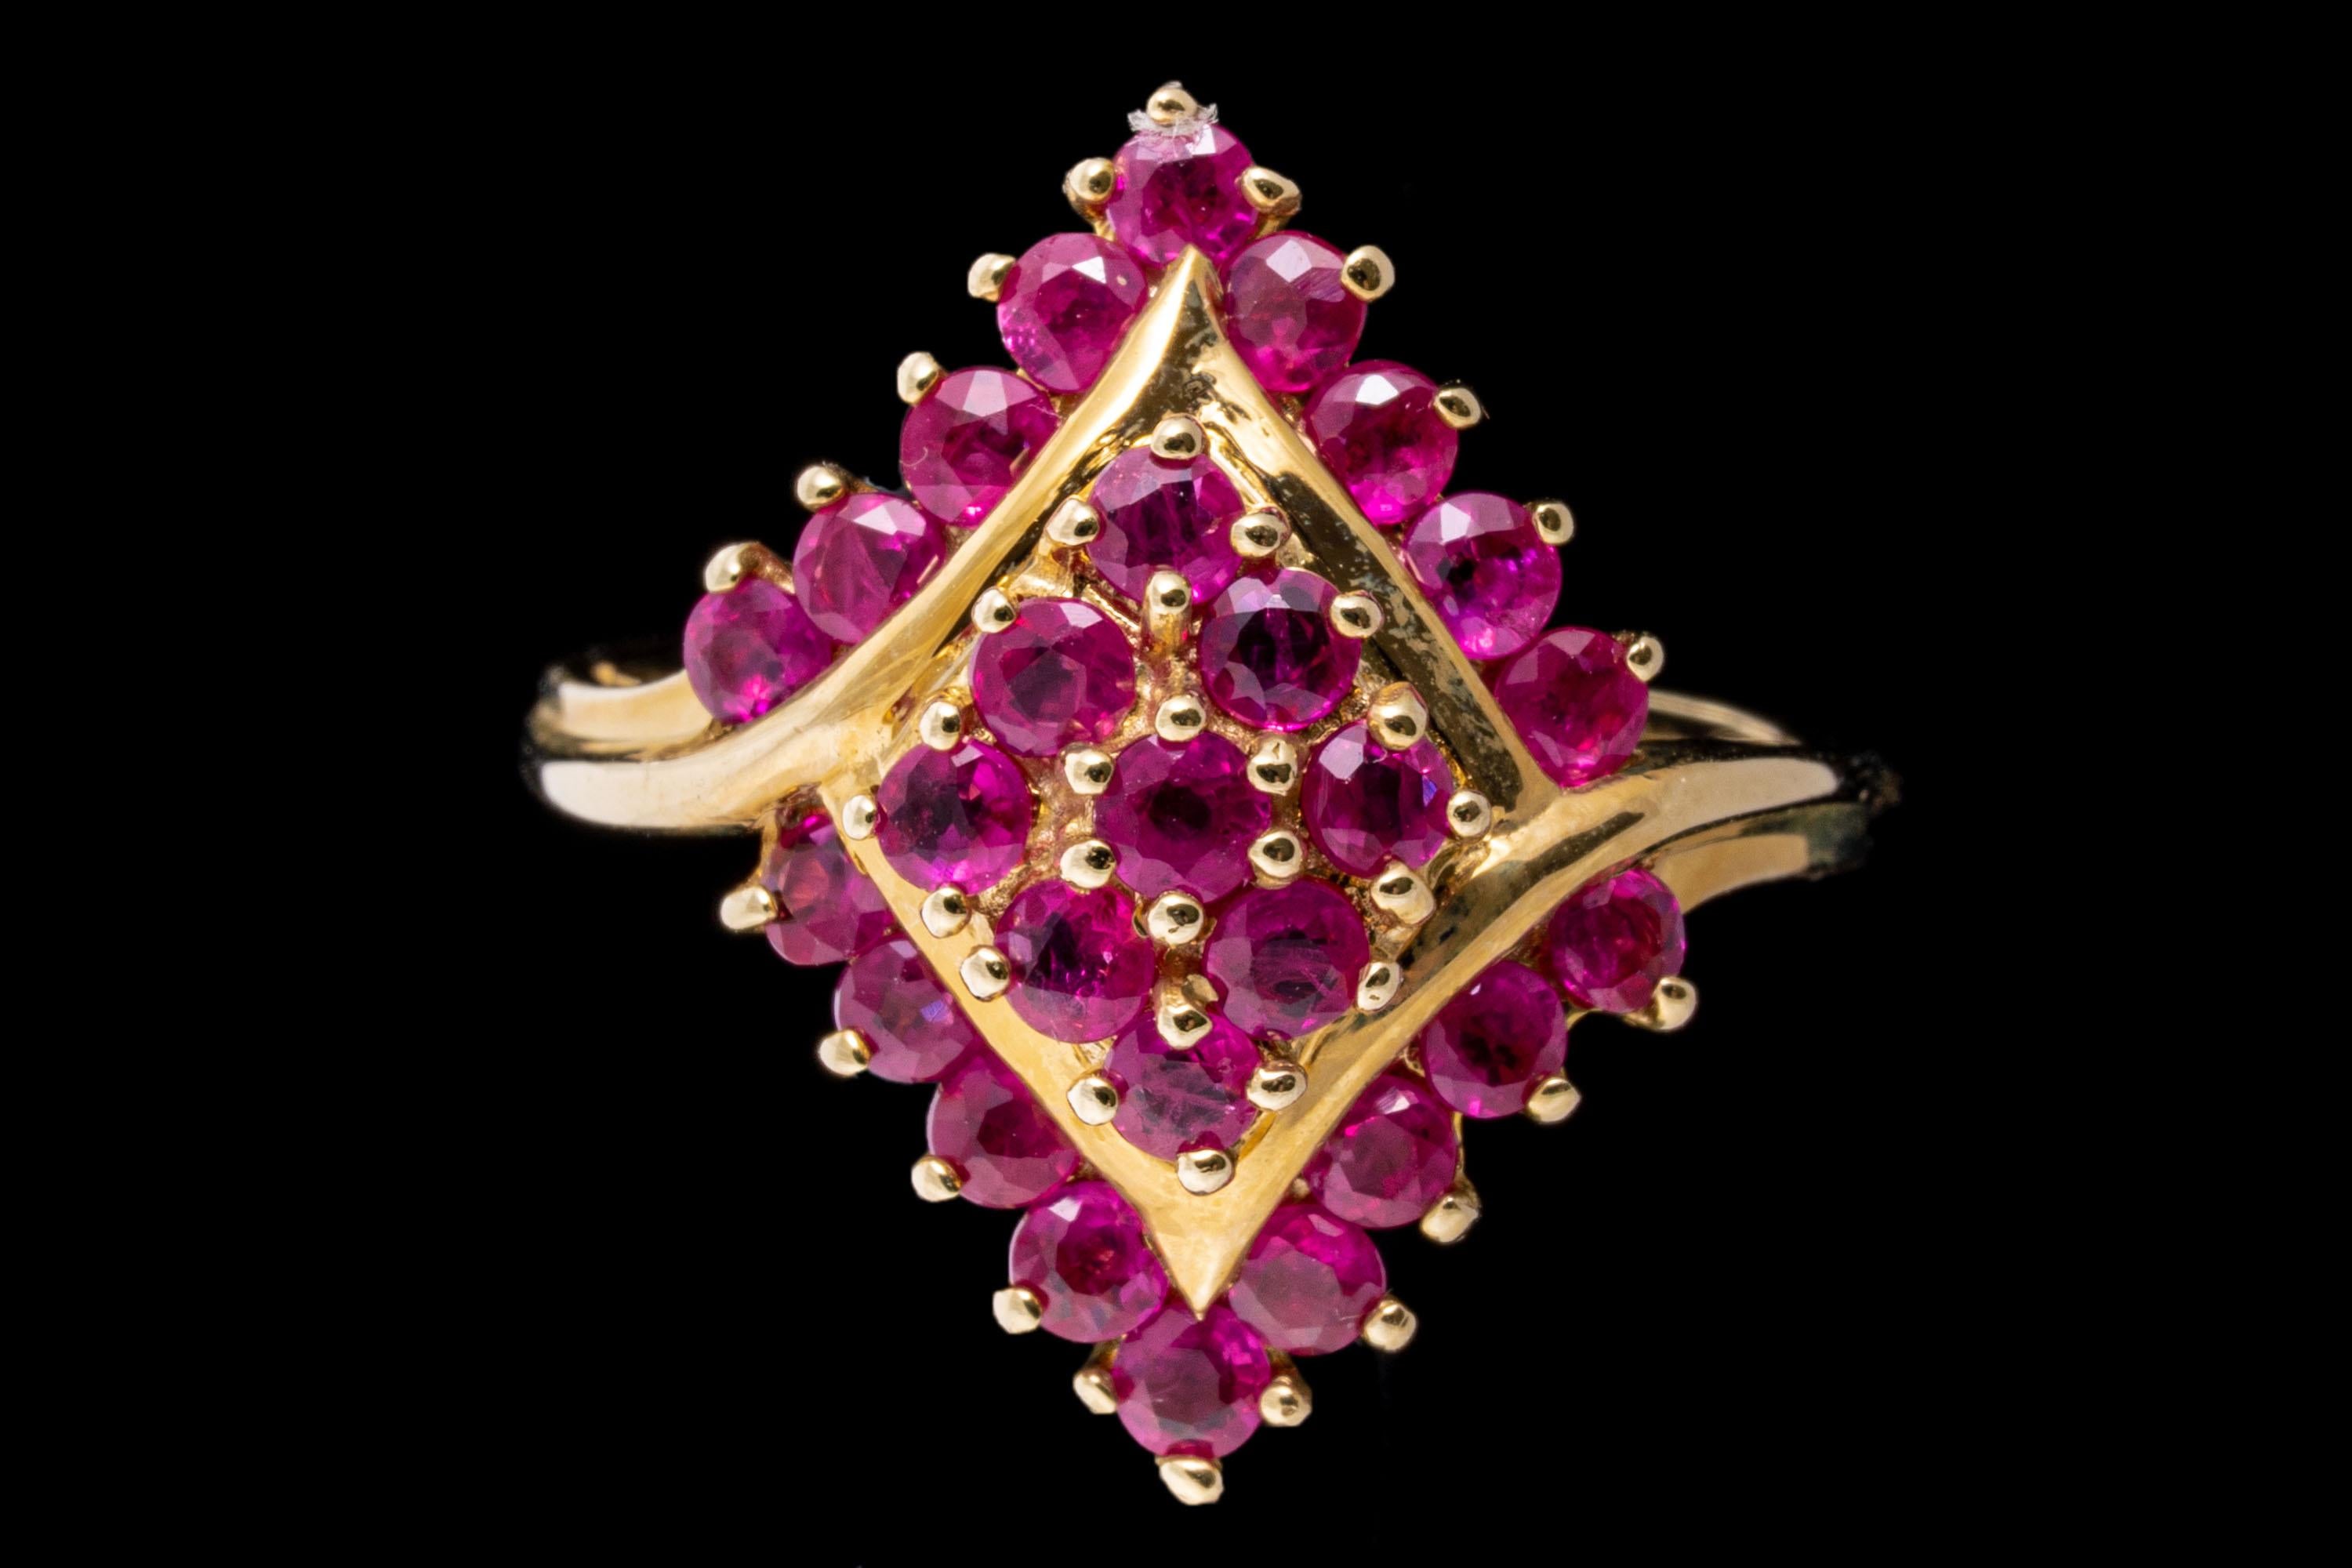 14k yellow gold ring. This lovely navette shaped bypass cluster ring is set with round faceted, pinkish red color rubies, prong set, approximately 1.39 TCW and decorated with a yellow gold embellishment.
Marks: 14k
Dimensions: 9/16